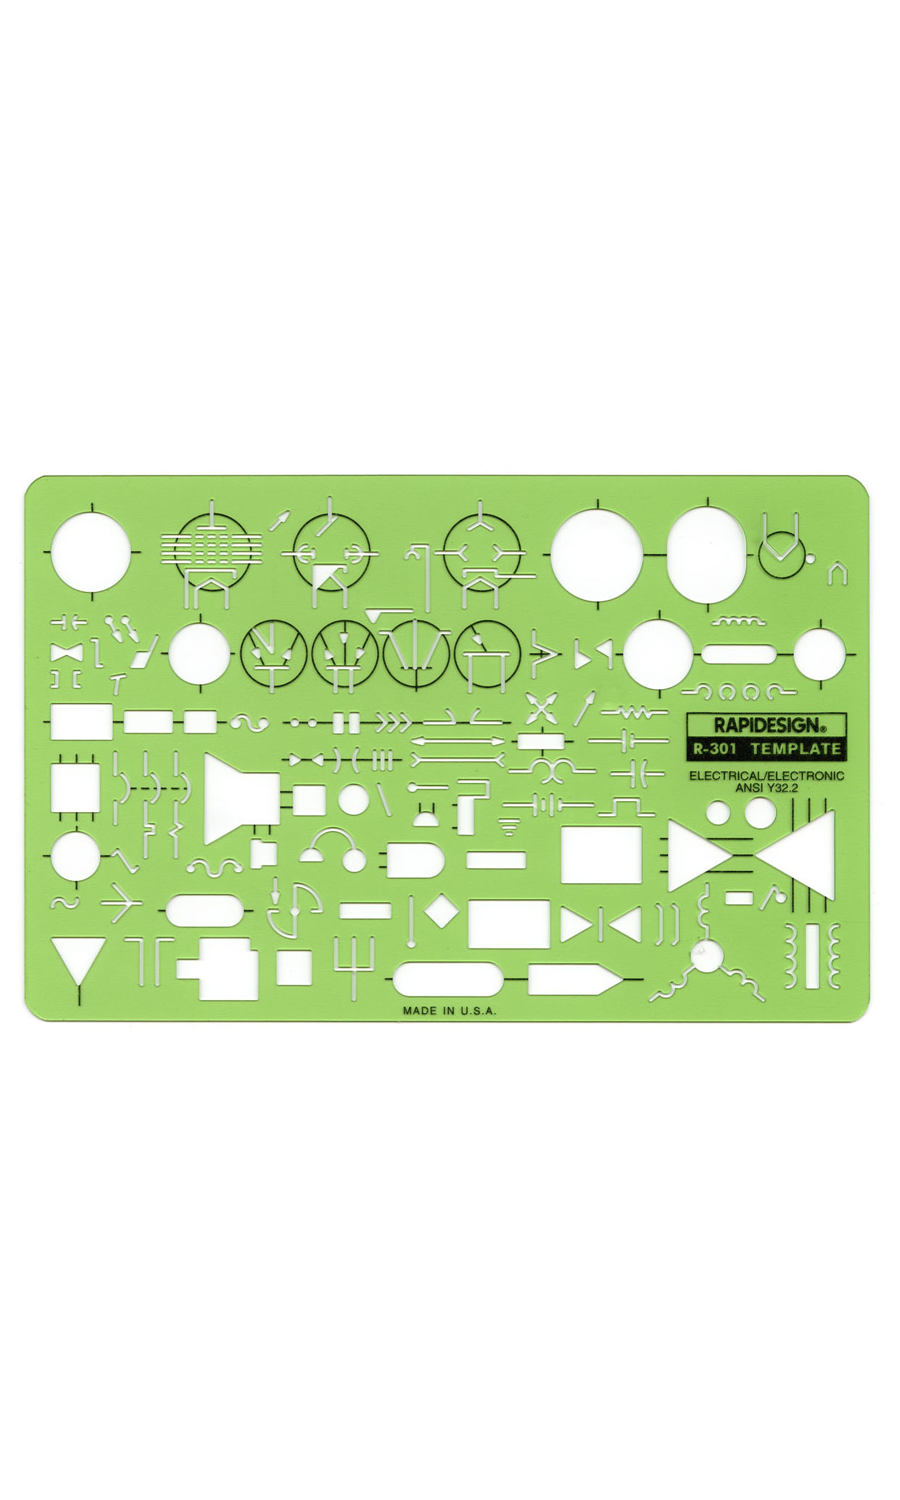 Standard Electrical/Electronic Template